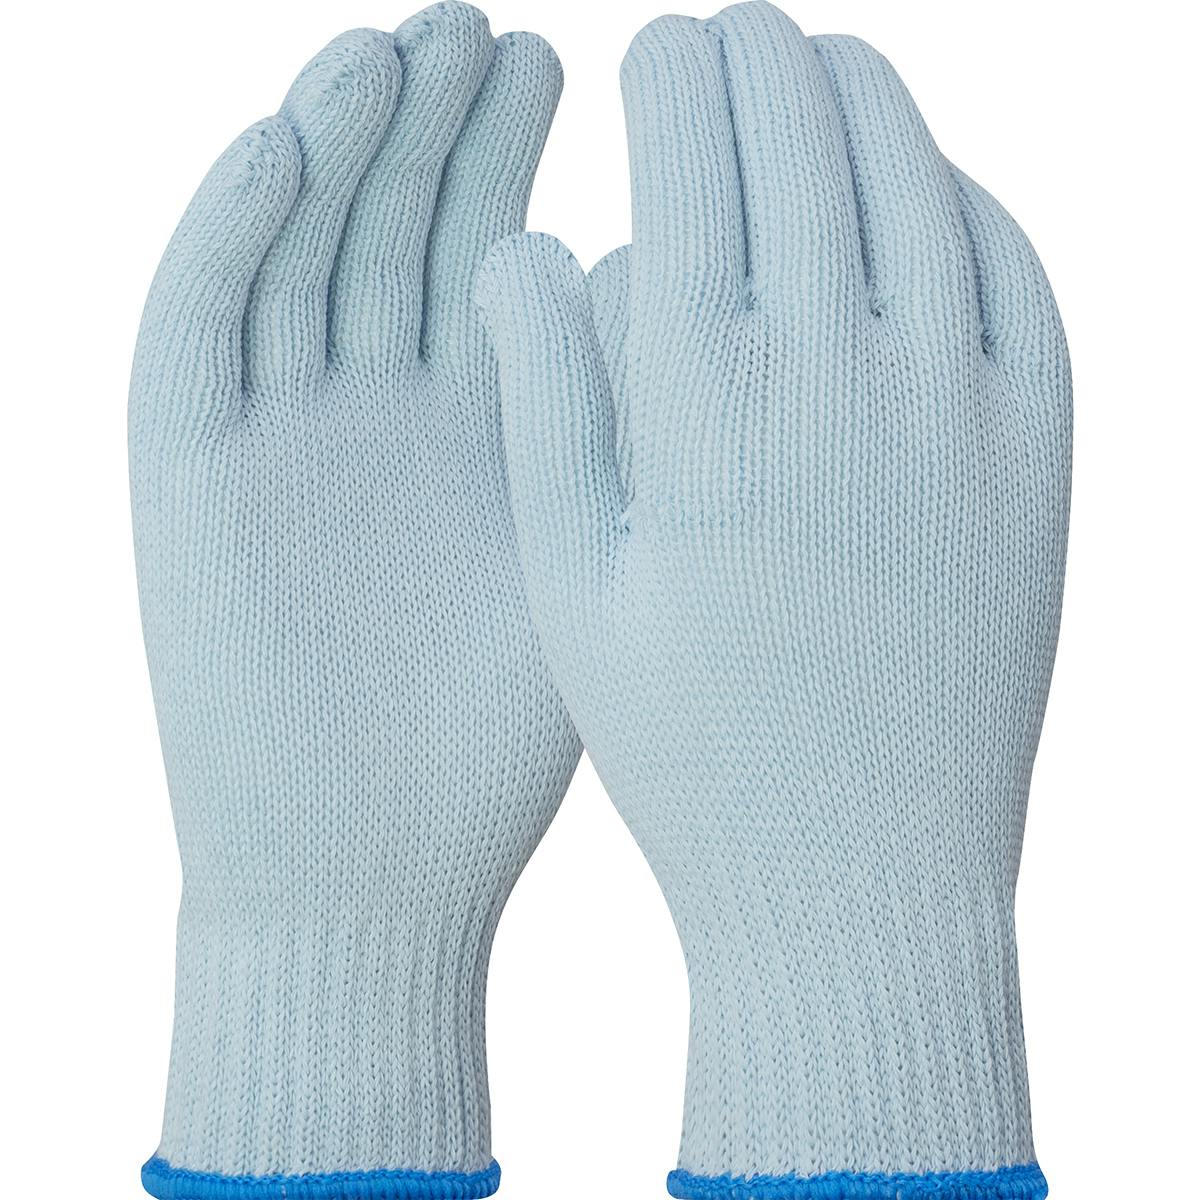 Medium Weight Seamless Knit Cotton/Recycled Polyester Glove - Blue, Blue (IM2270T) - L